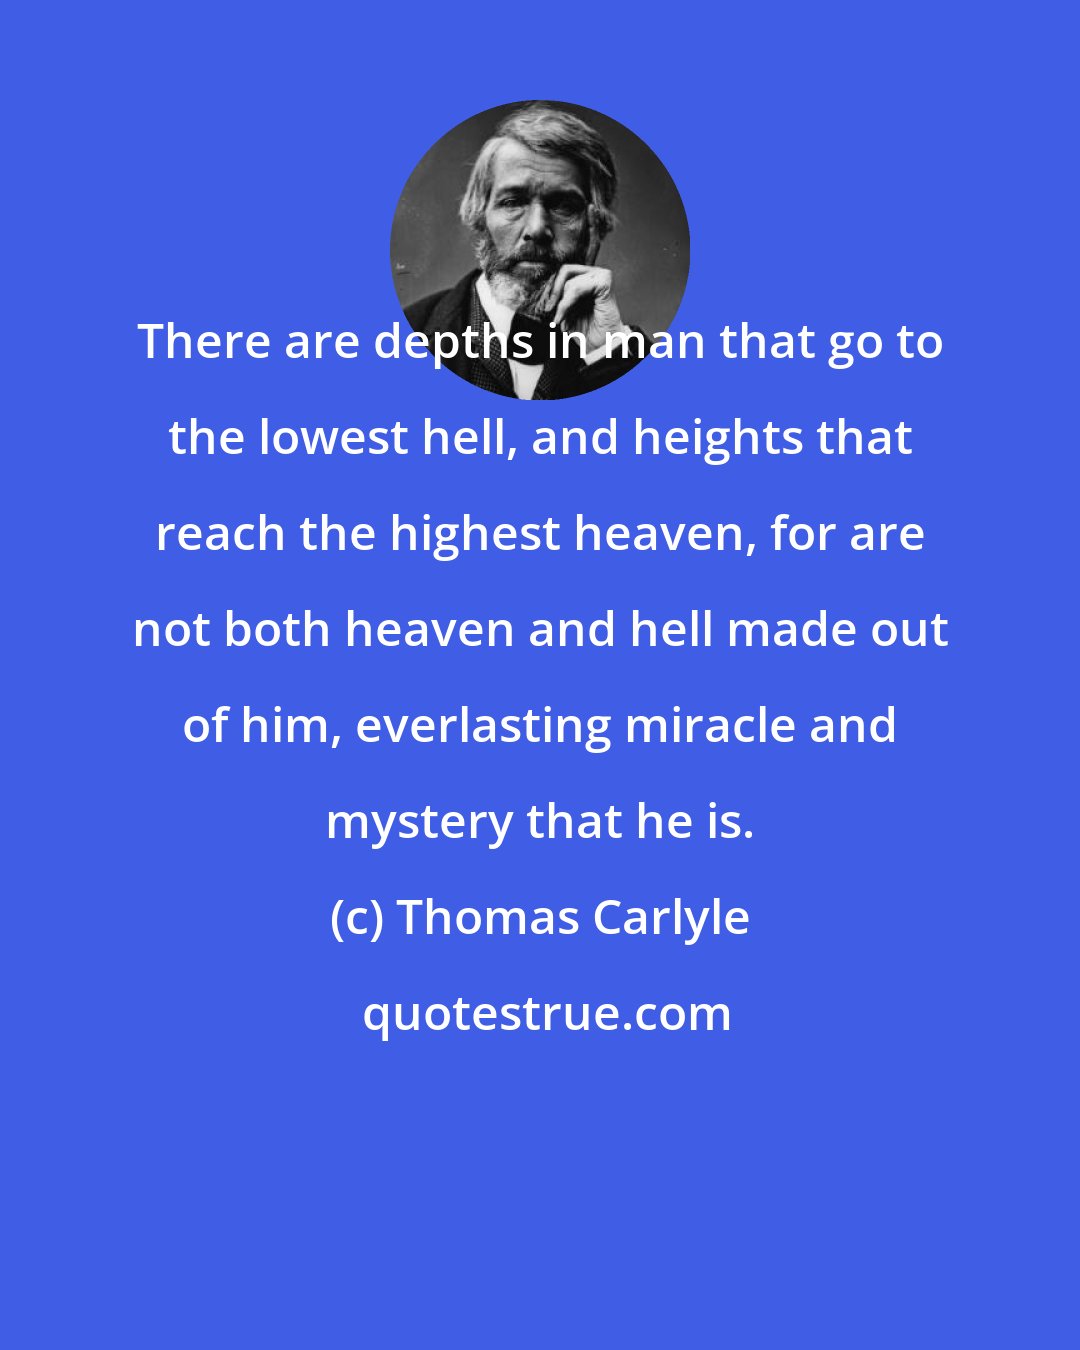 Thomas Carlyle: There are depths in man that go to the lowest hell, and heights that reach the highest heaven, for are not both heaven and hell made out of him, everlasting miracle and mystery that he is.